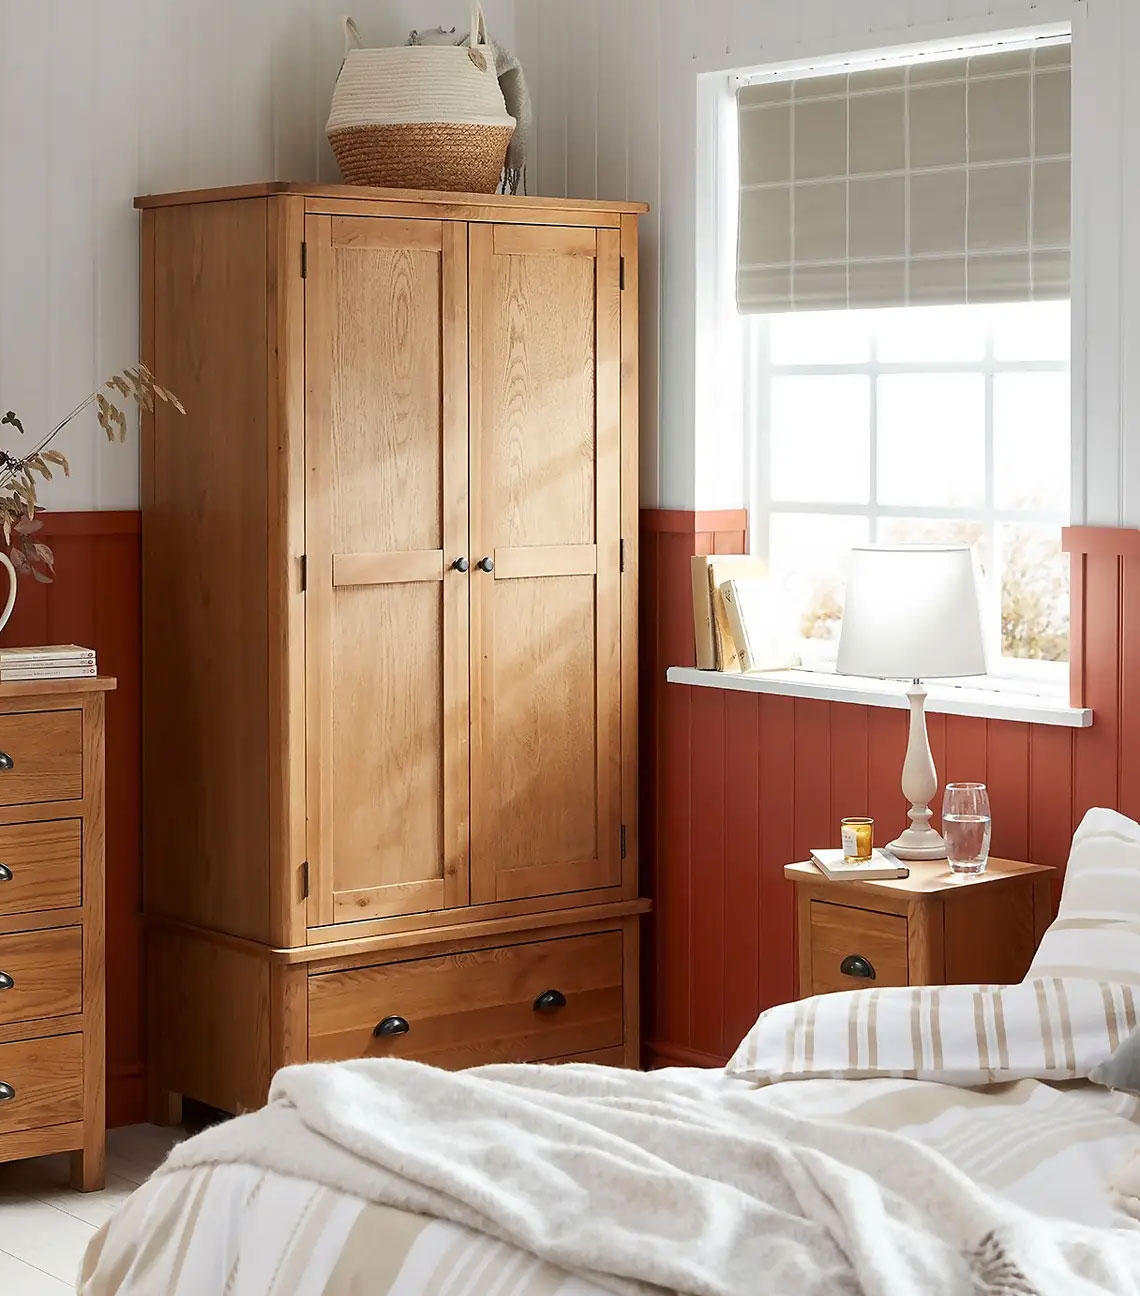 An oak freestanding hinged wardrobe with drawers